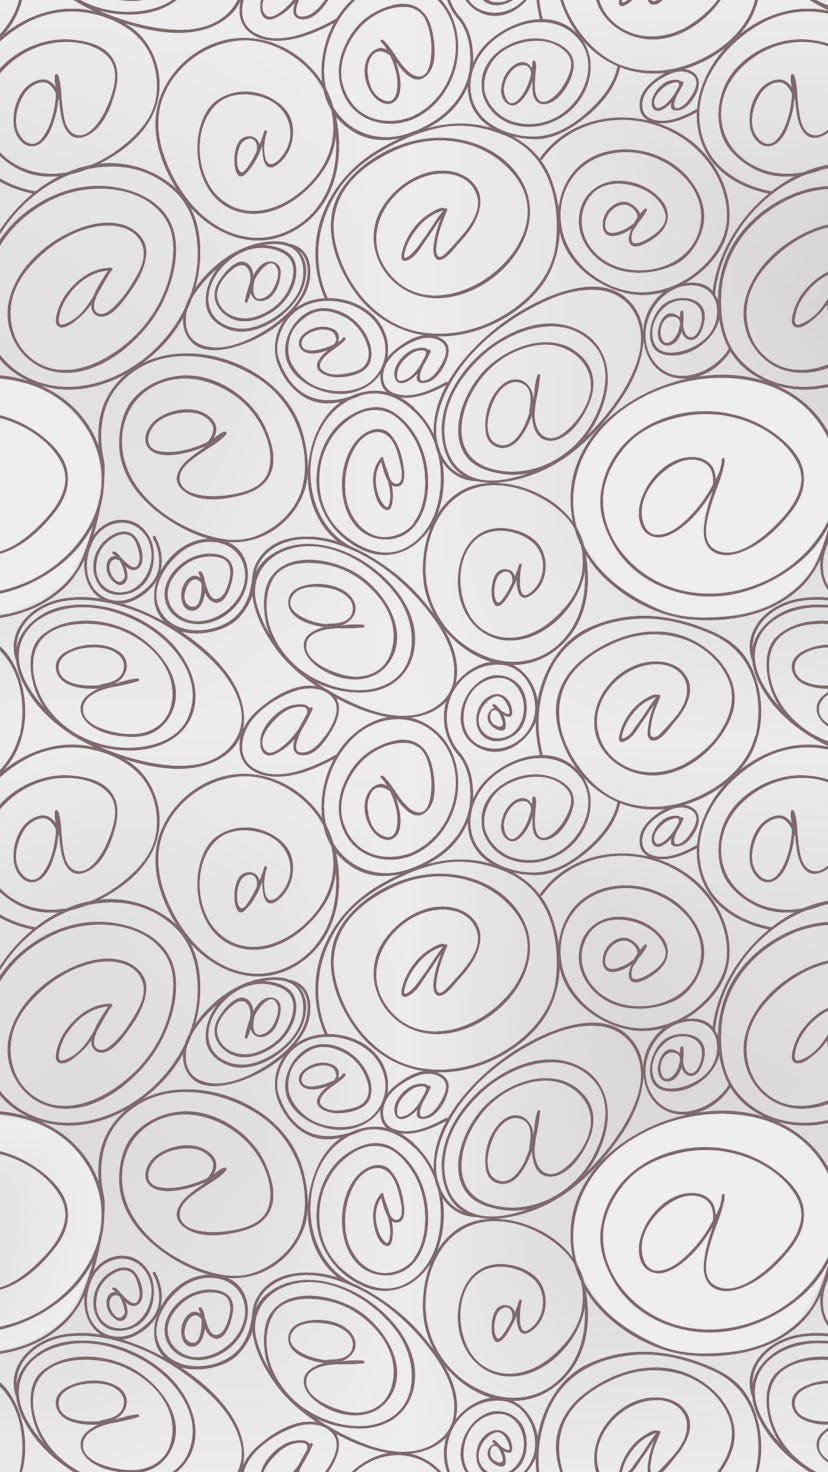 e-mail sign seamless background. email or spam mail pattern concept.